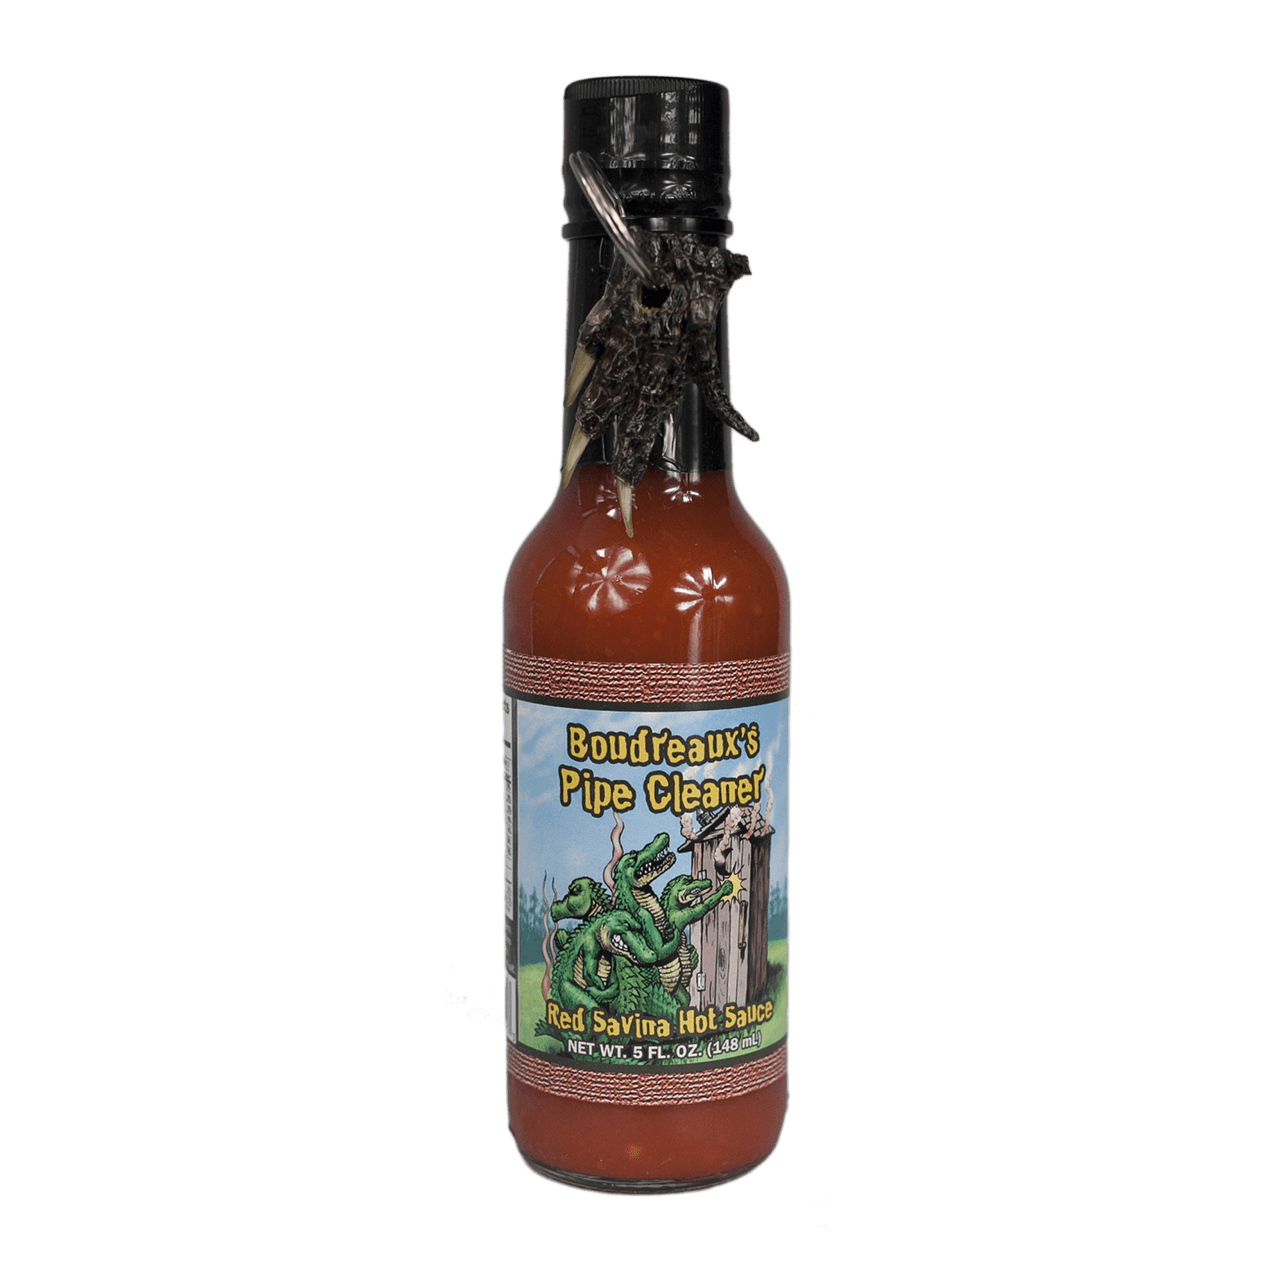 Boudreaux's Pipe Cleaner Hot Sauce